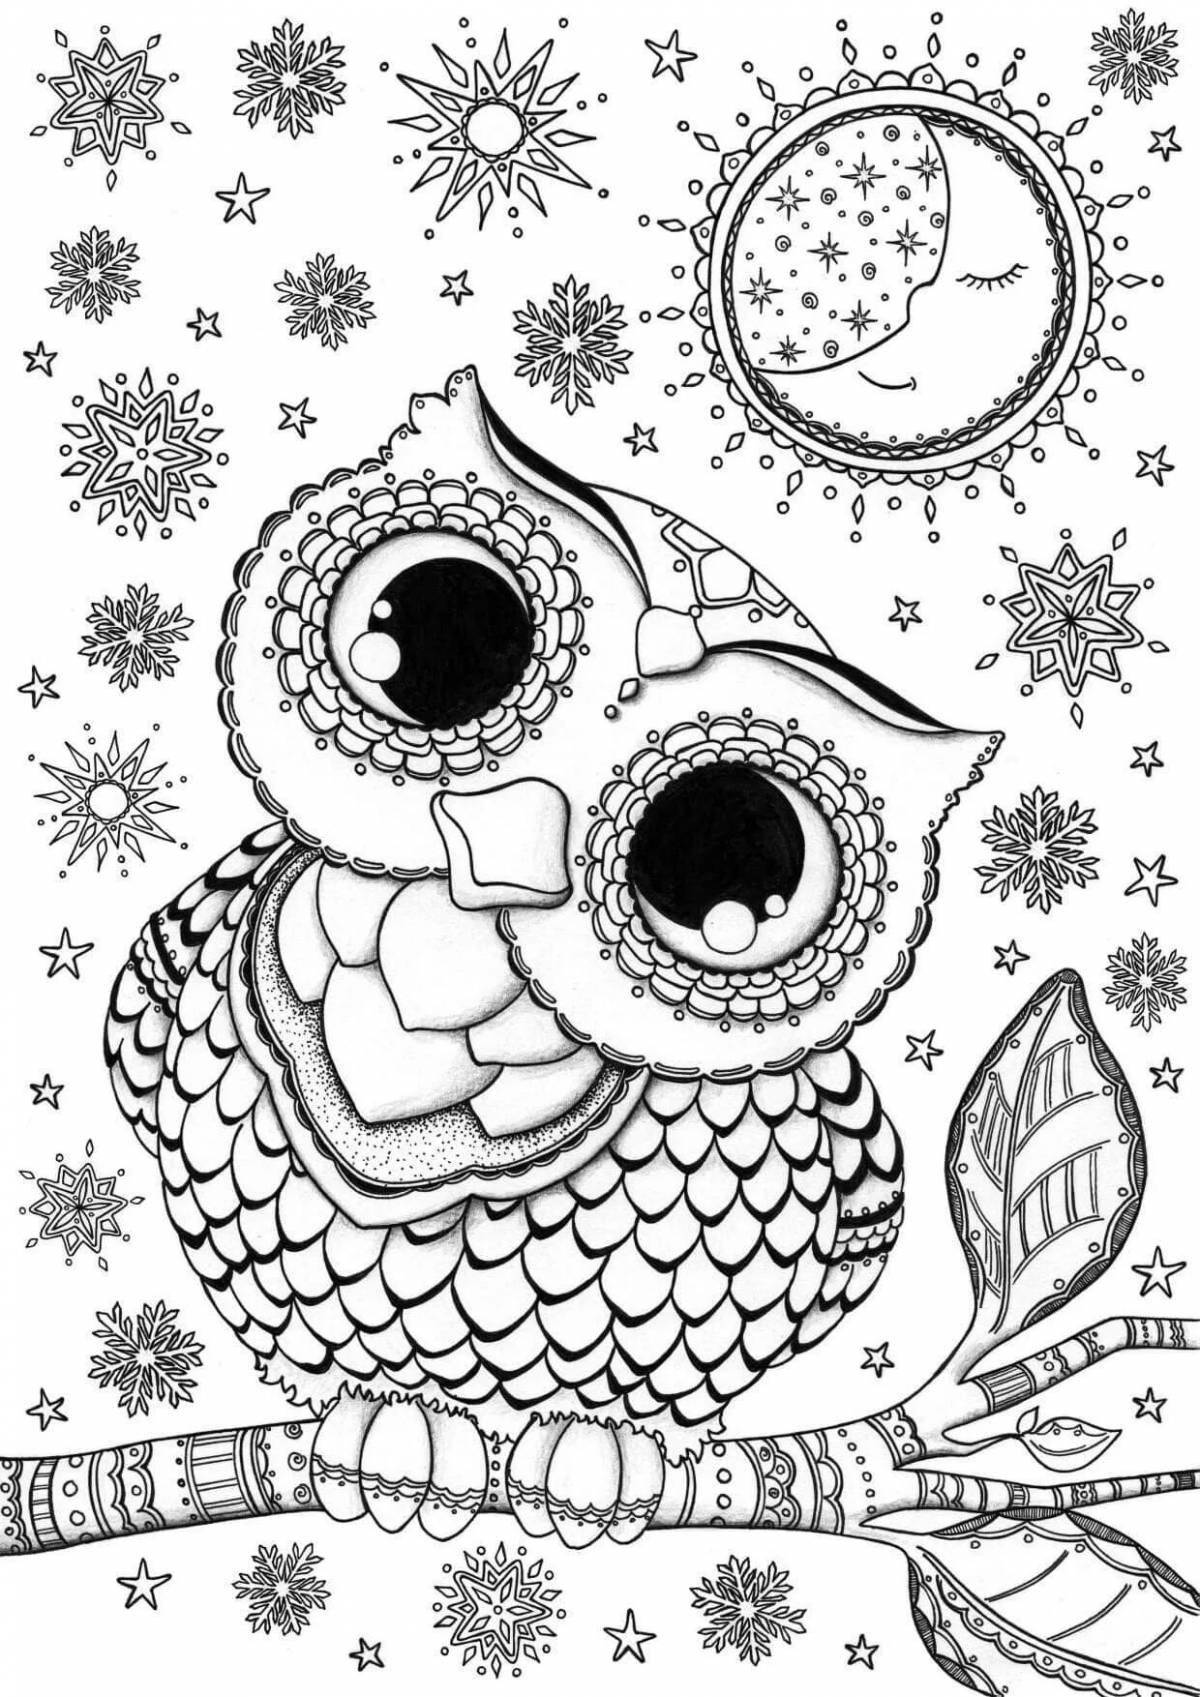 Adorable anti-stress owl coloring pages